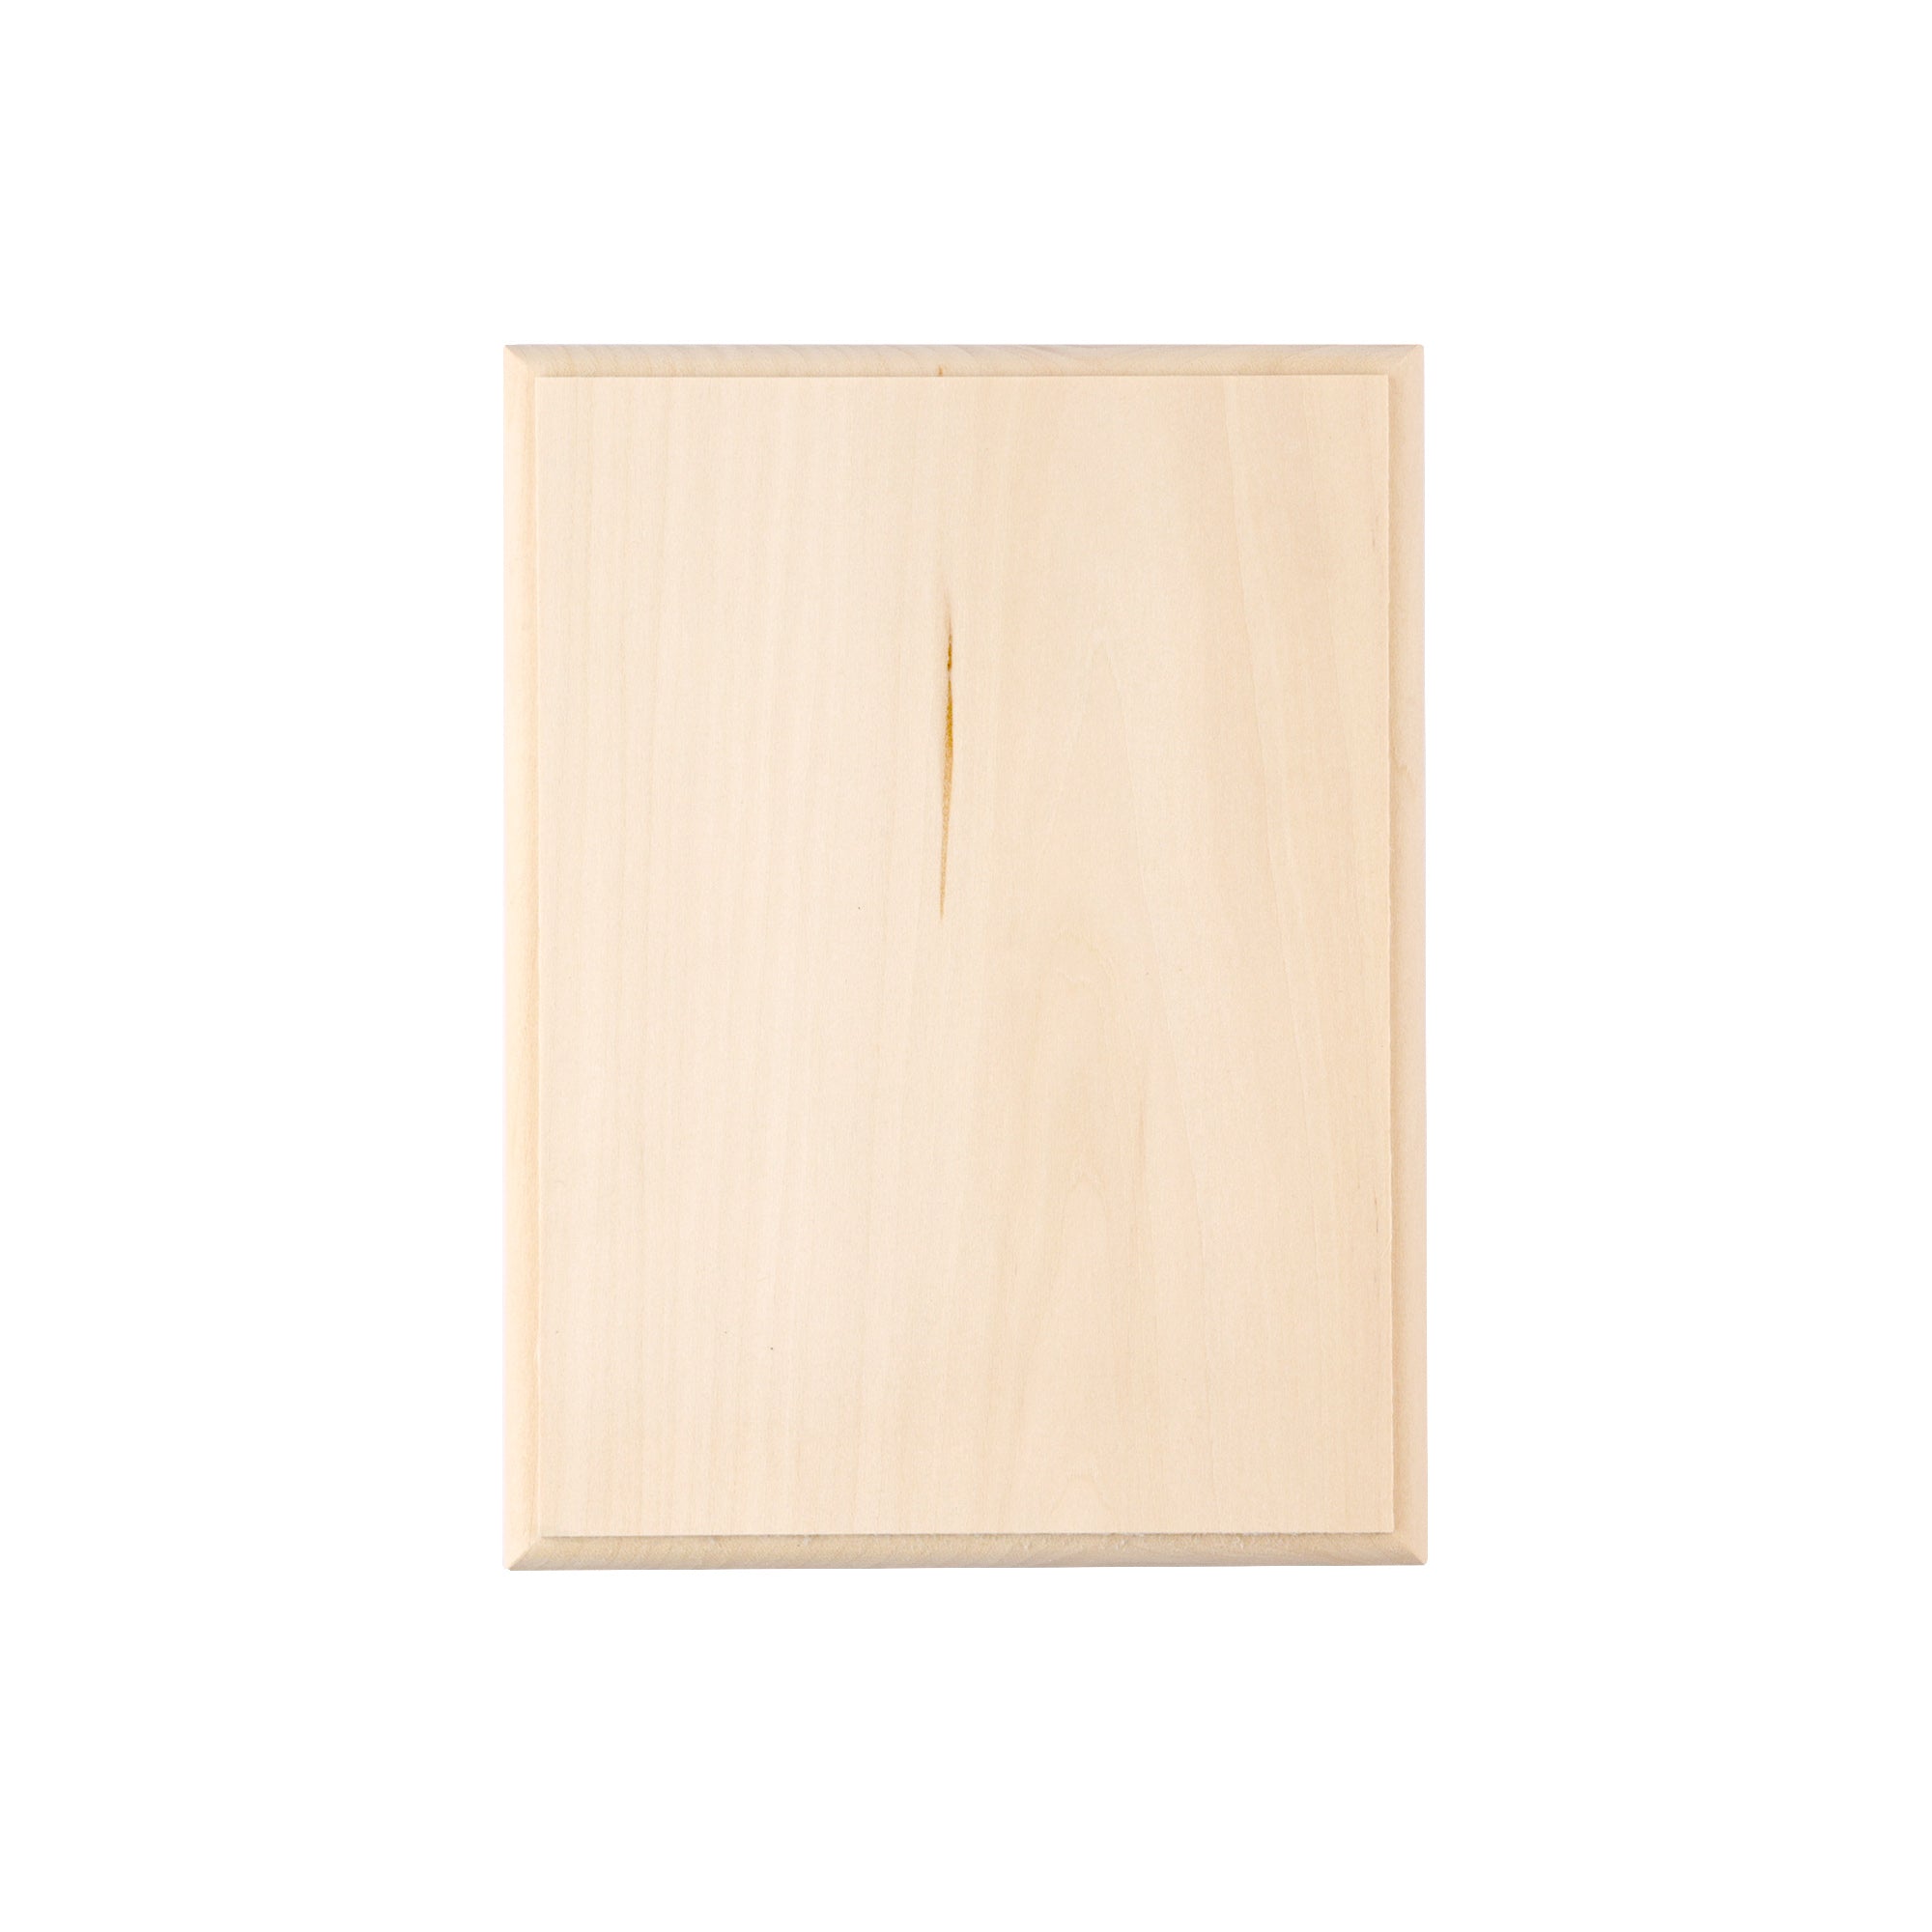 Walnut Hollow French Corner Basswood Plaque, 12 in. x 16 in. x 3/4 in.